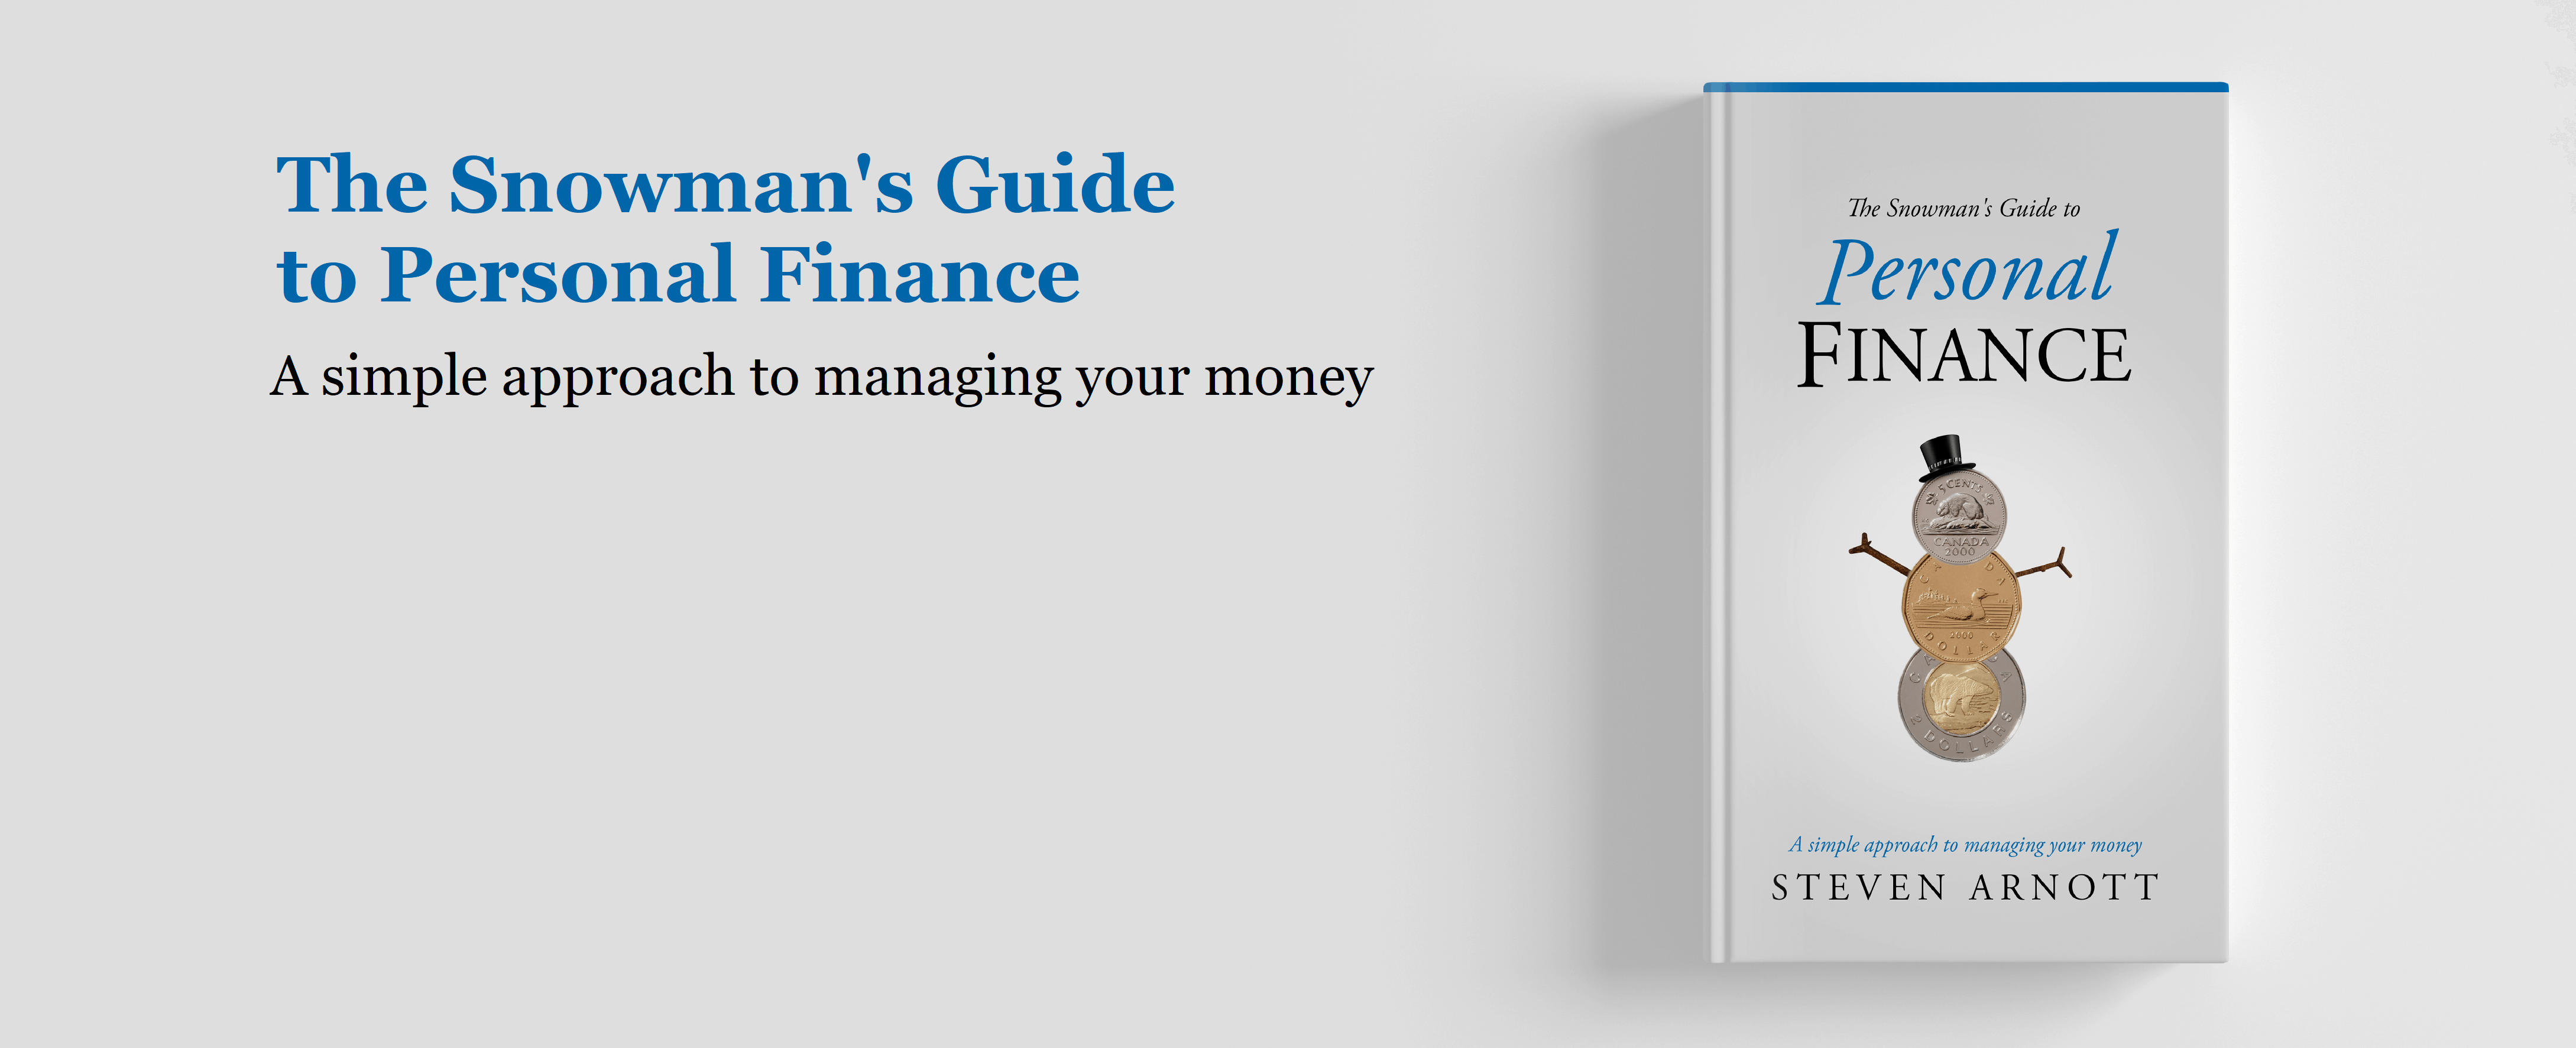 A winter-themed personal finance book featuring a snowman made of coins and a top hat, titled 